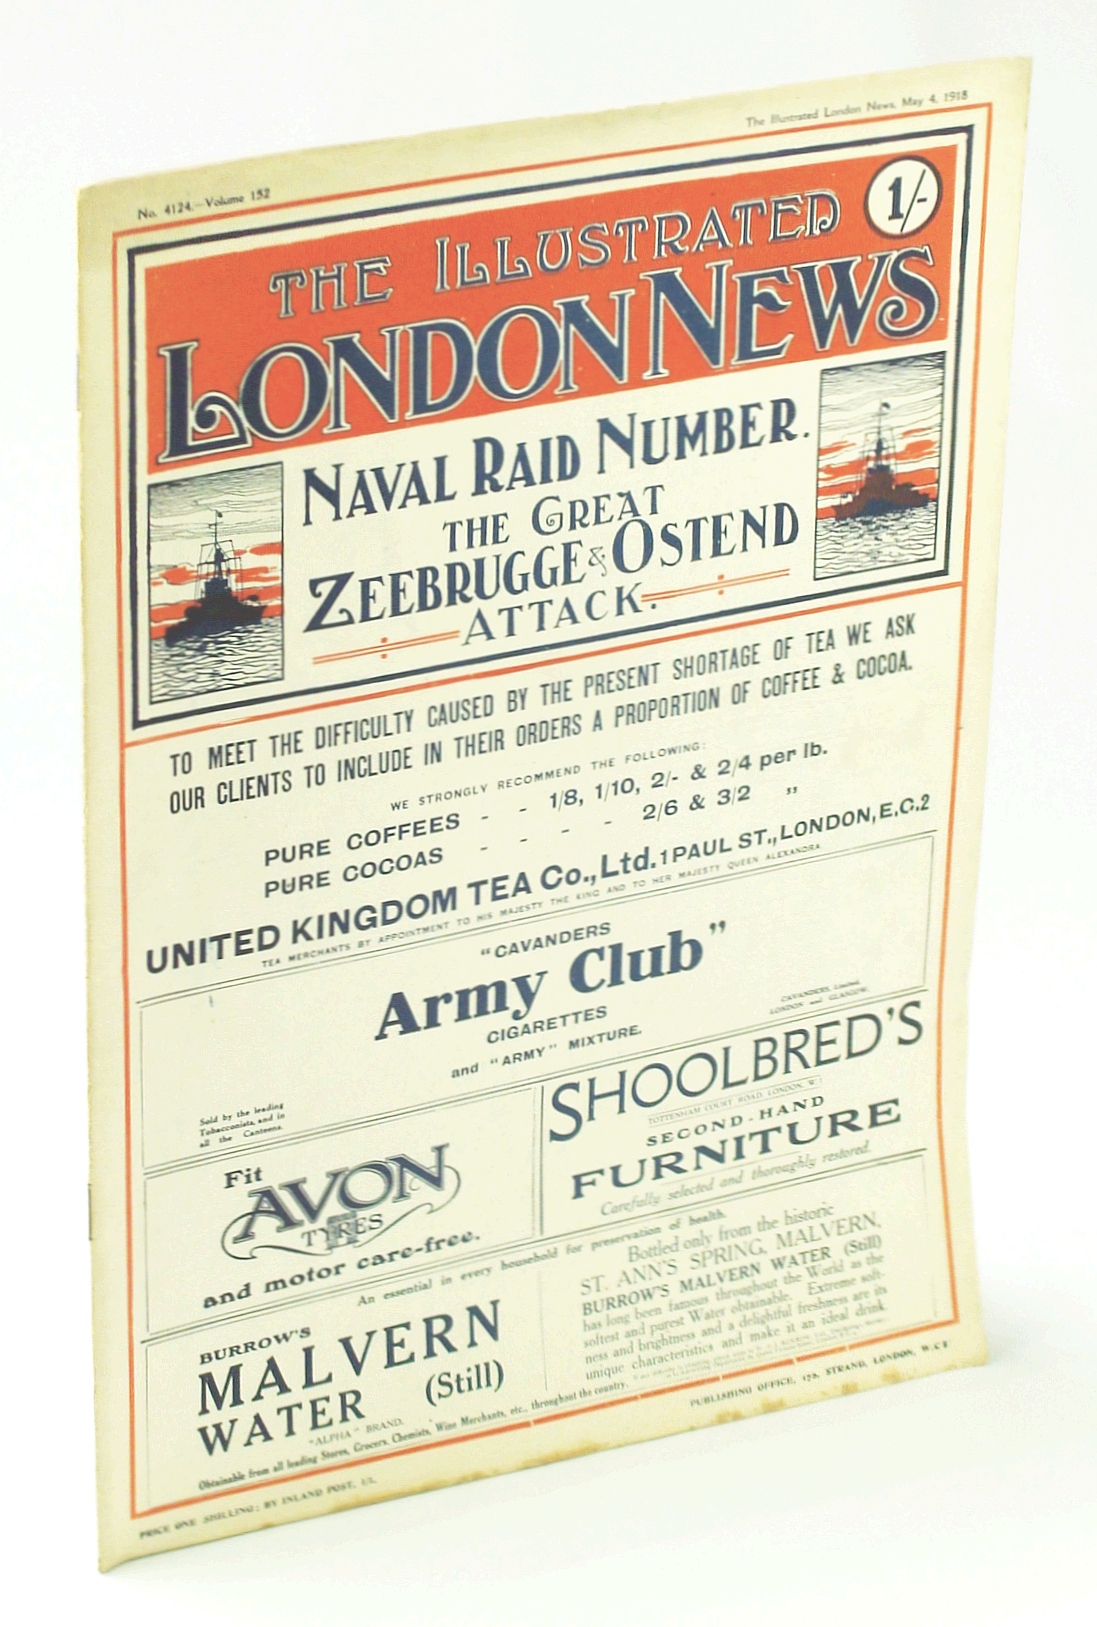 CHESTERTON, G.K.; ET AL - The Illustrated London News, Saturday May 4, 1918 : Naval Raid Number - the Great Zeebrugge & Ostend Attack